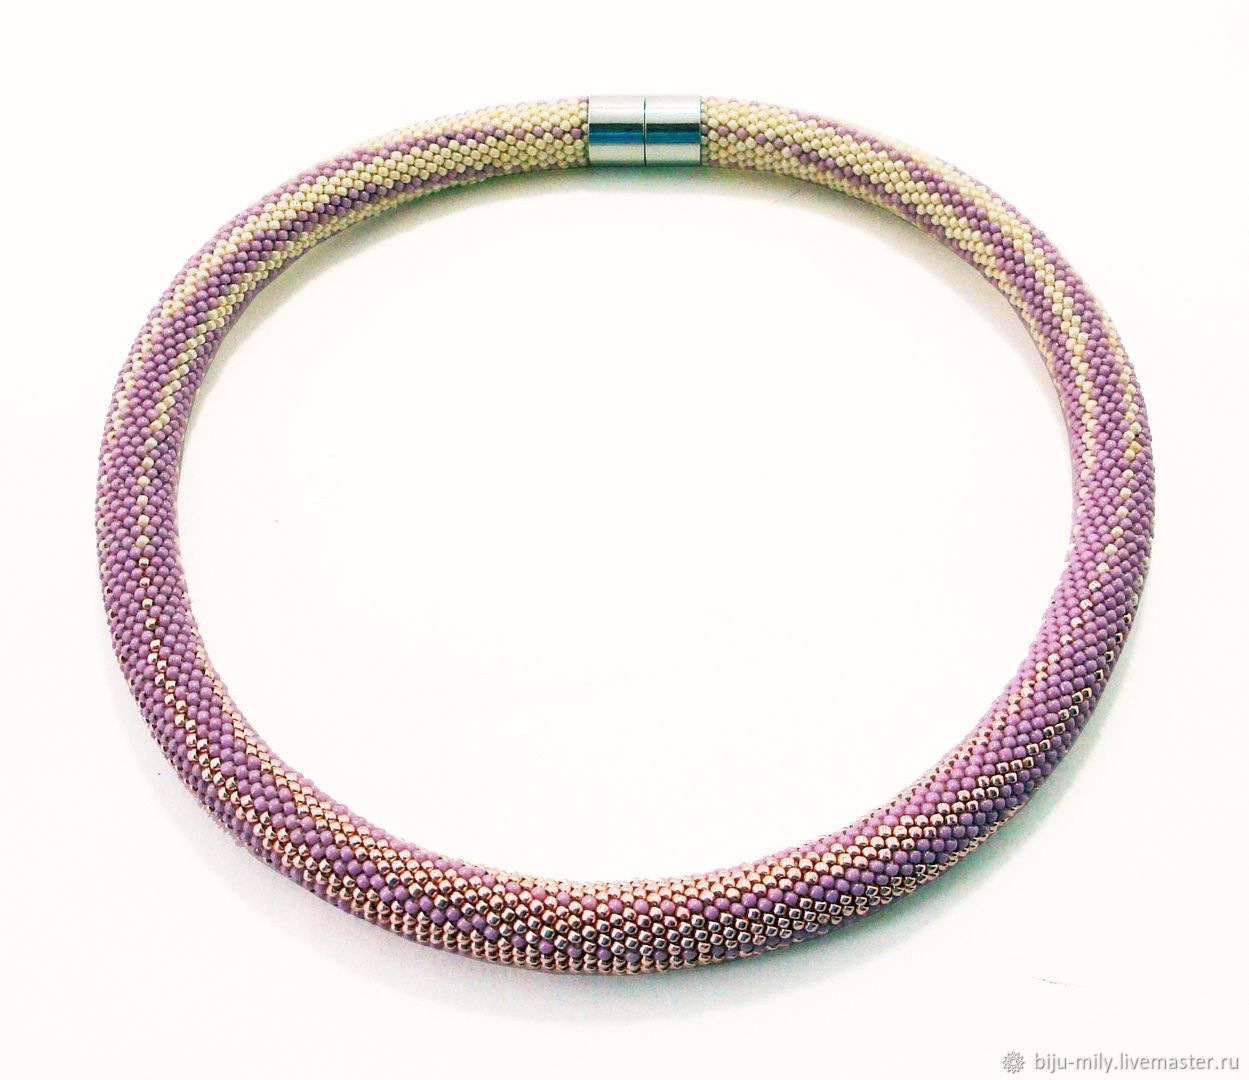 Necklace-harness made of Japanese beads Milky Way, Necklace, Abakan,  Фото №1